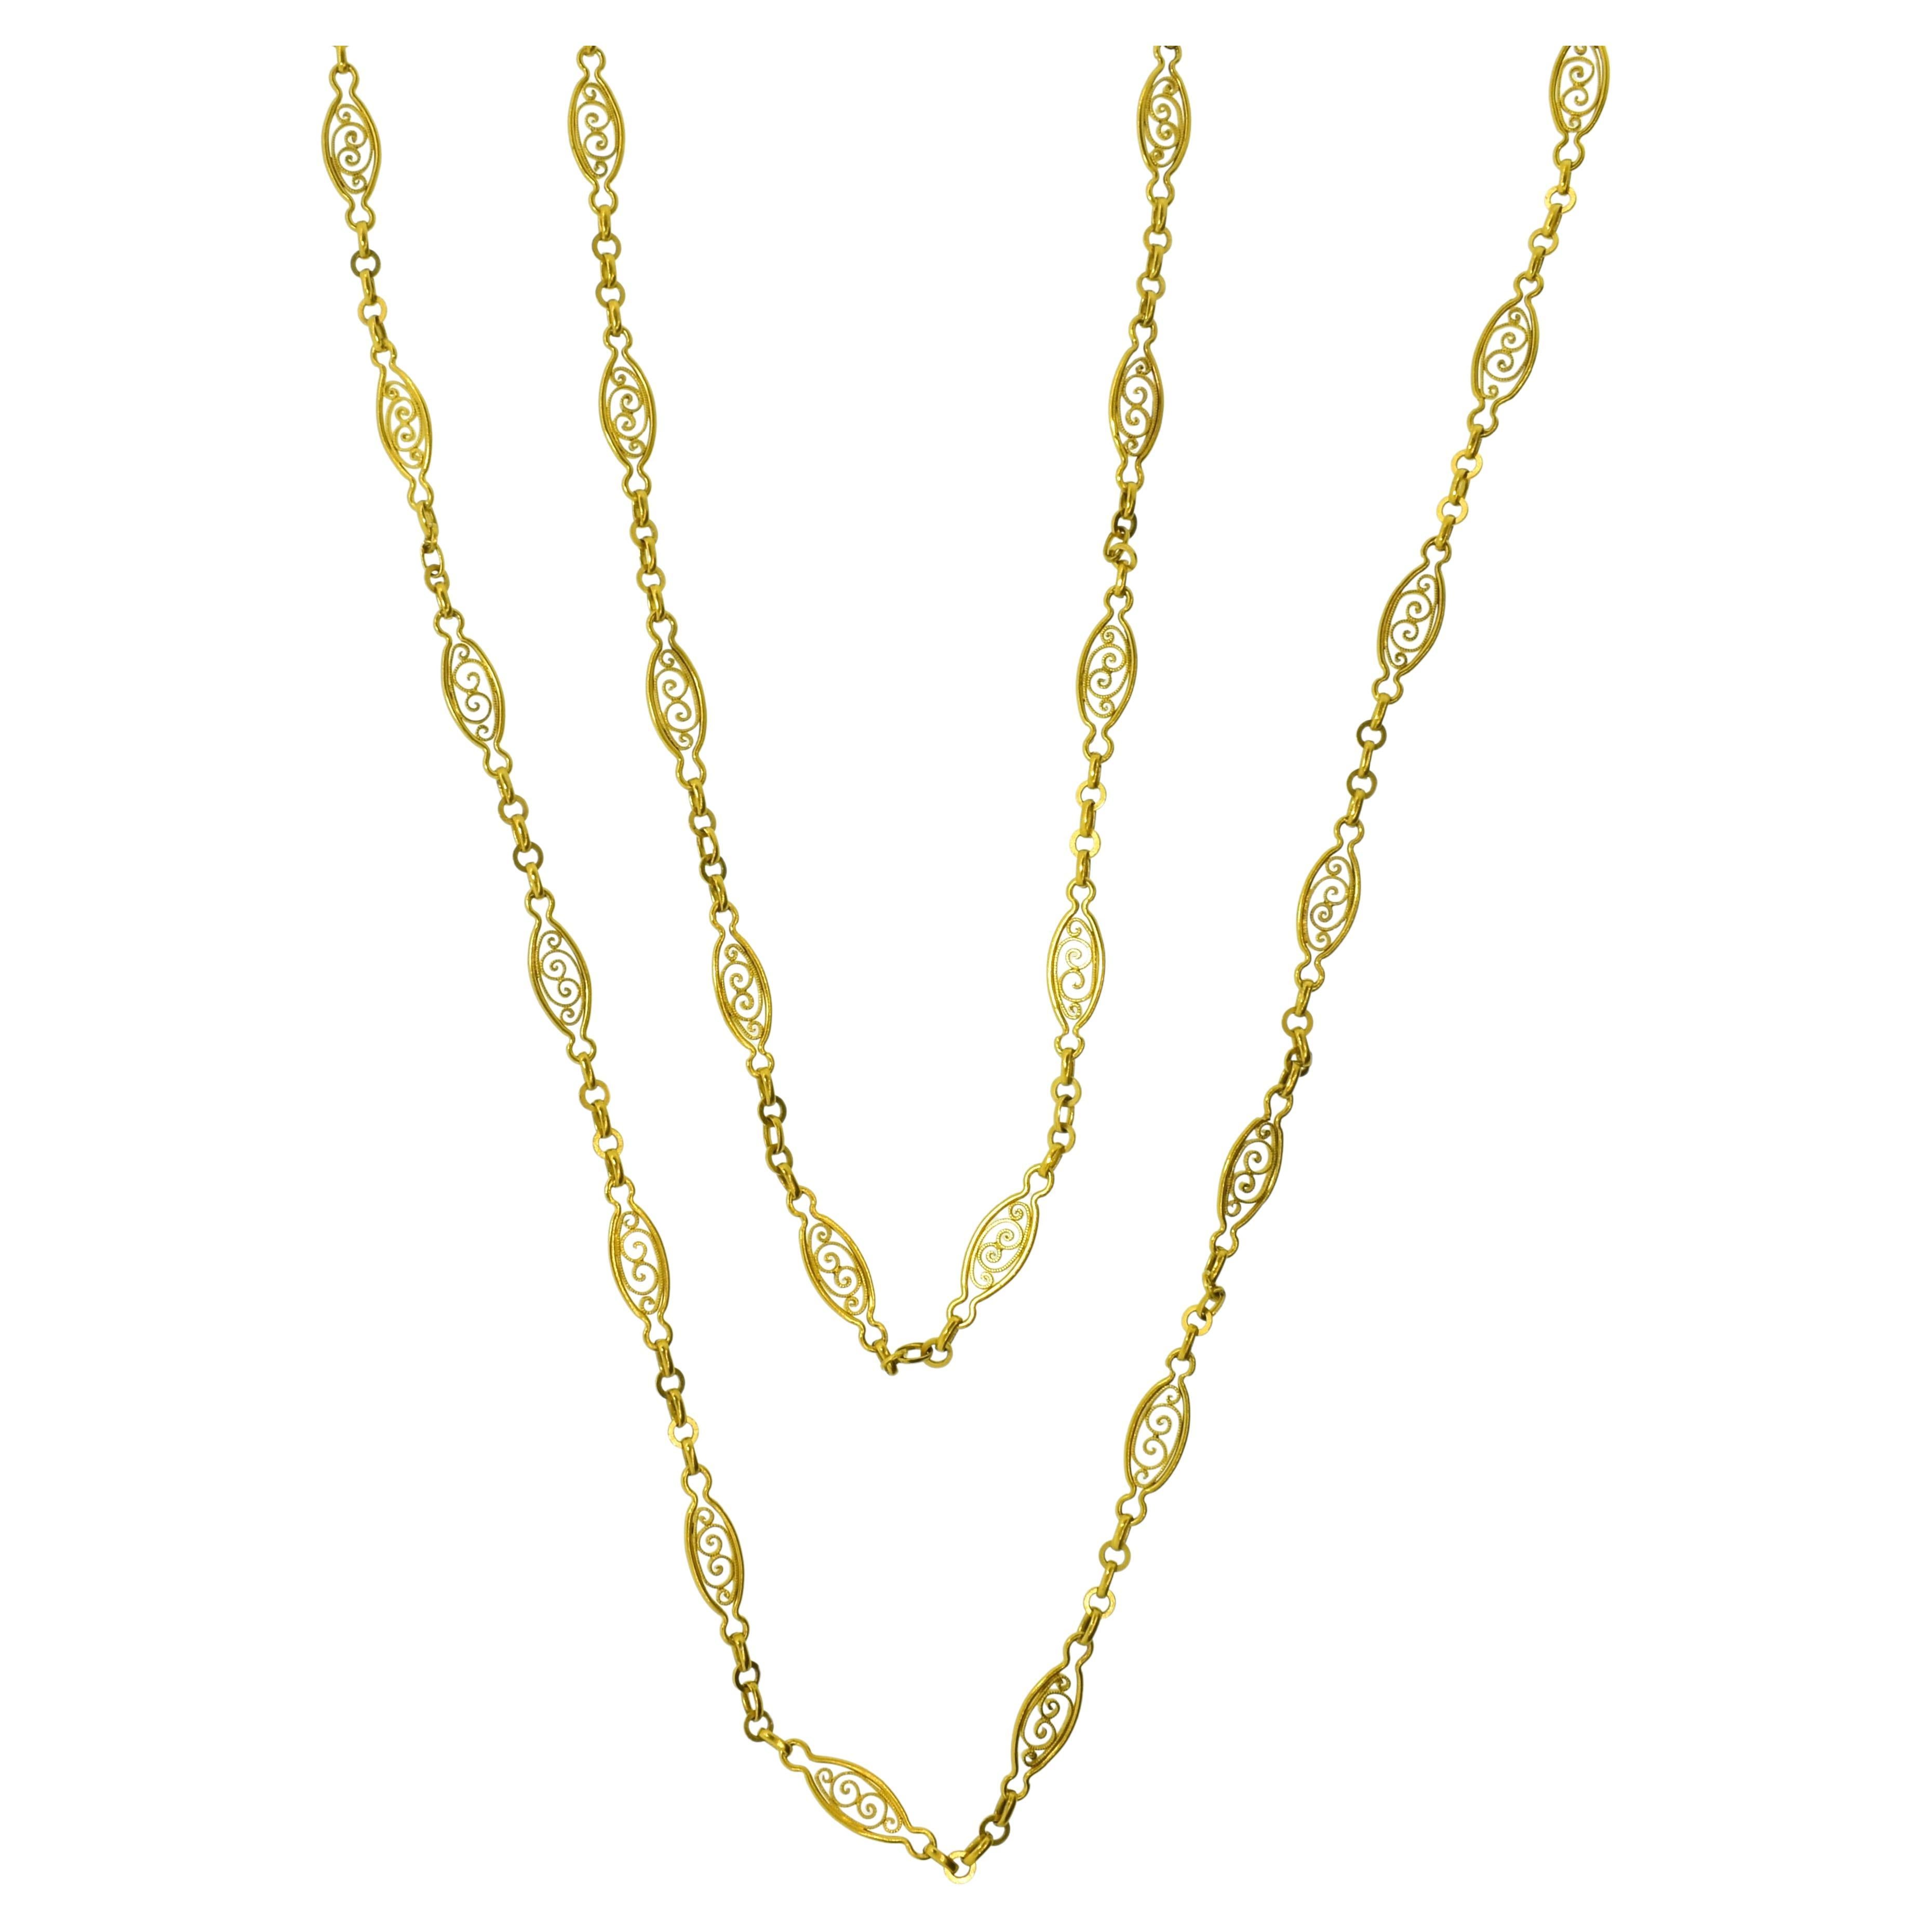 18K gold long chain, French, c. 1900.  An intricate and unusual handmade link, 59.5 inches long, 30.86 grams.  This antique French chain can be doubled over and even tripled.  An its widest, the link is 5.5 mm.  This chain looks wonderful on its